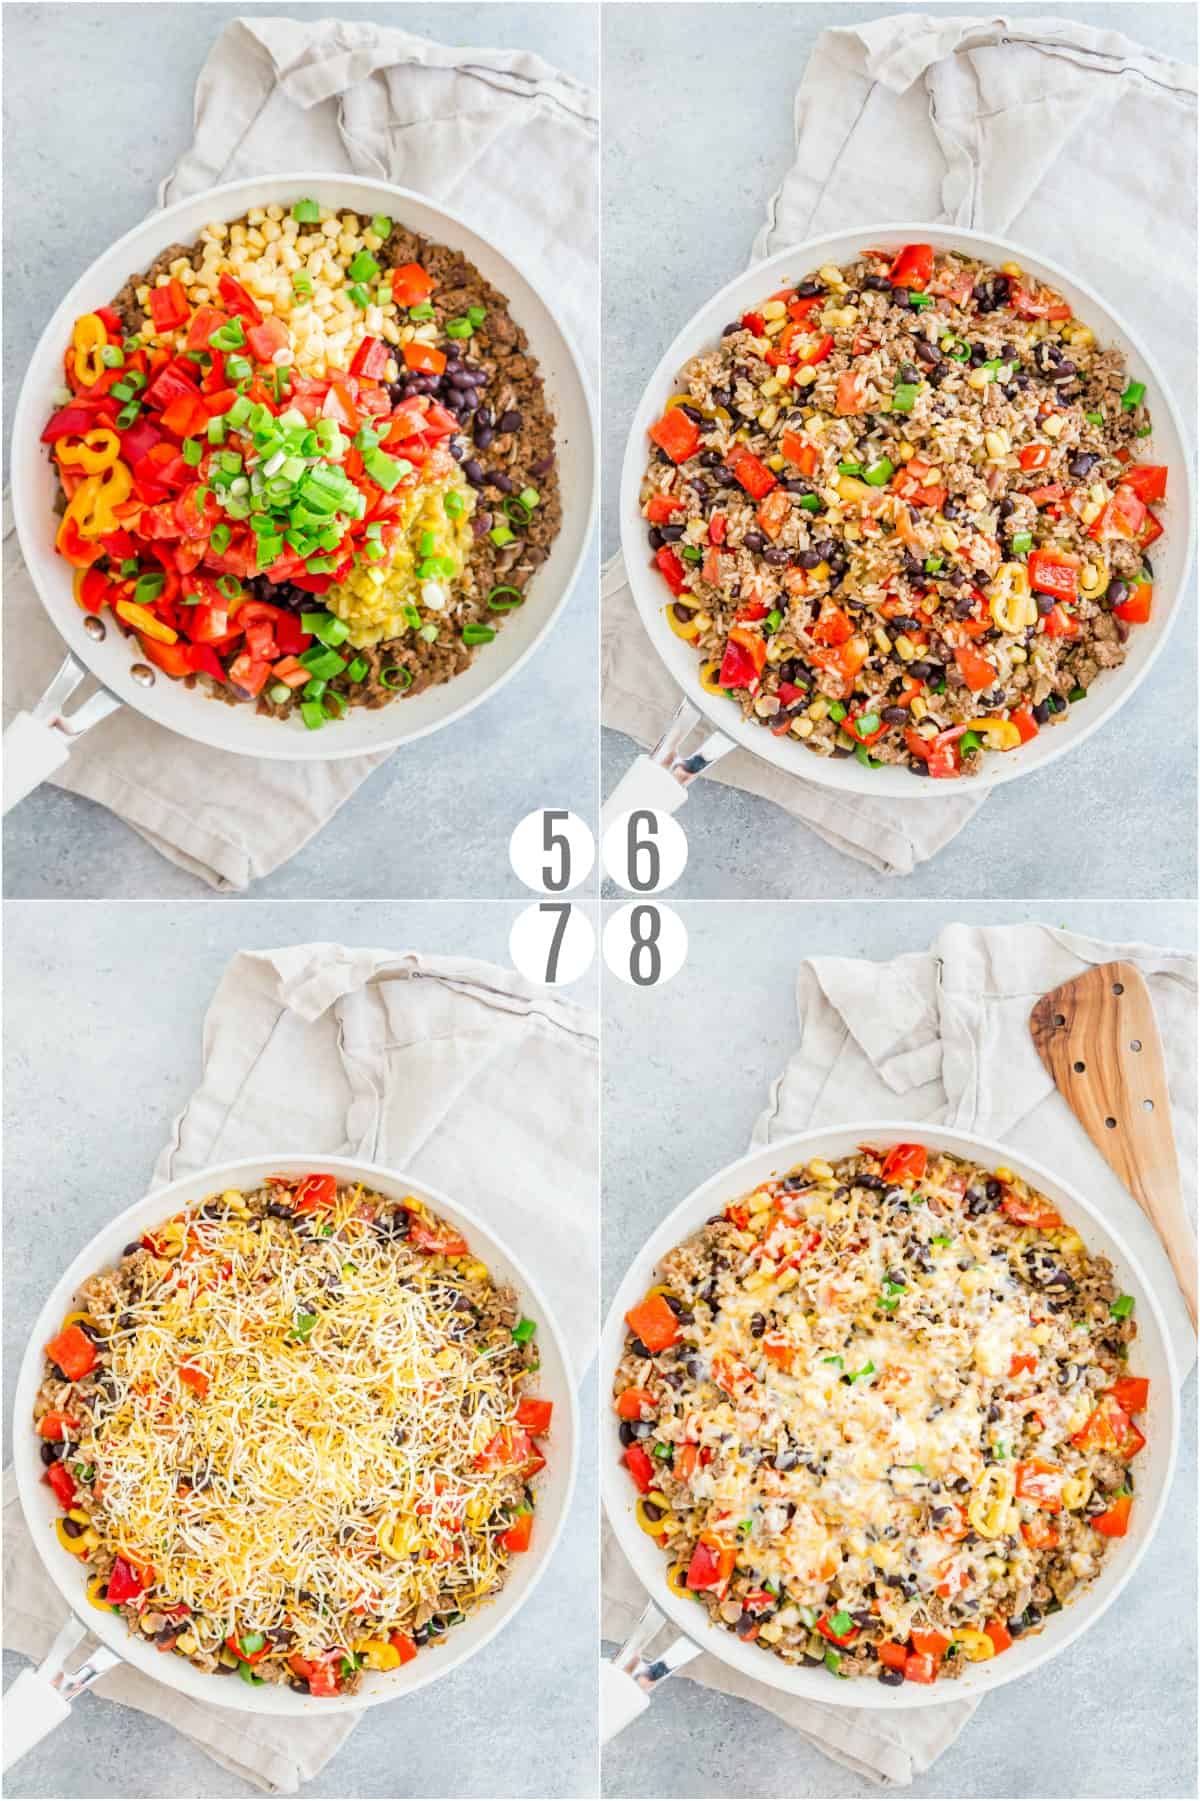 Step by step photos showing how to make beef taco skillet.